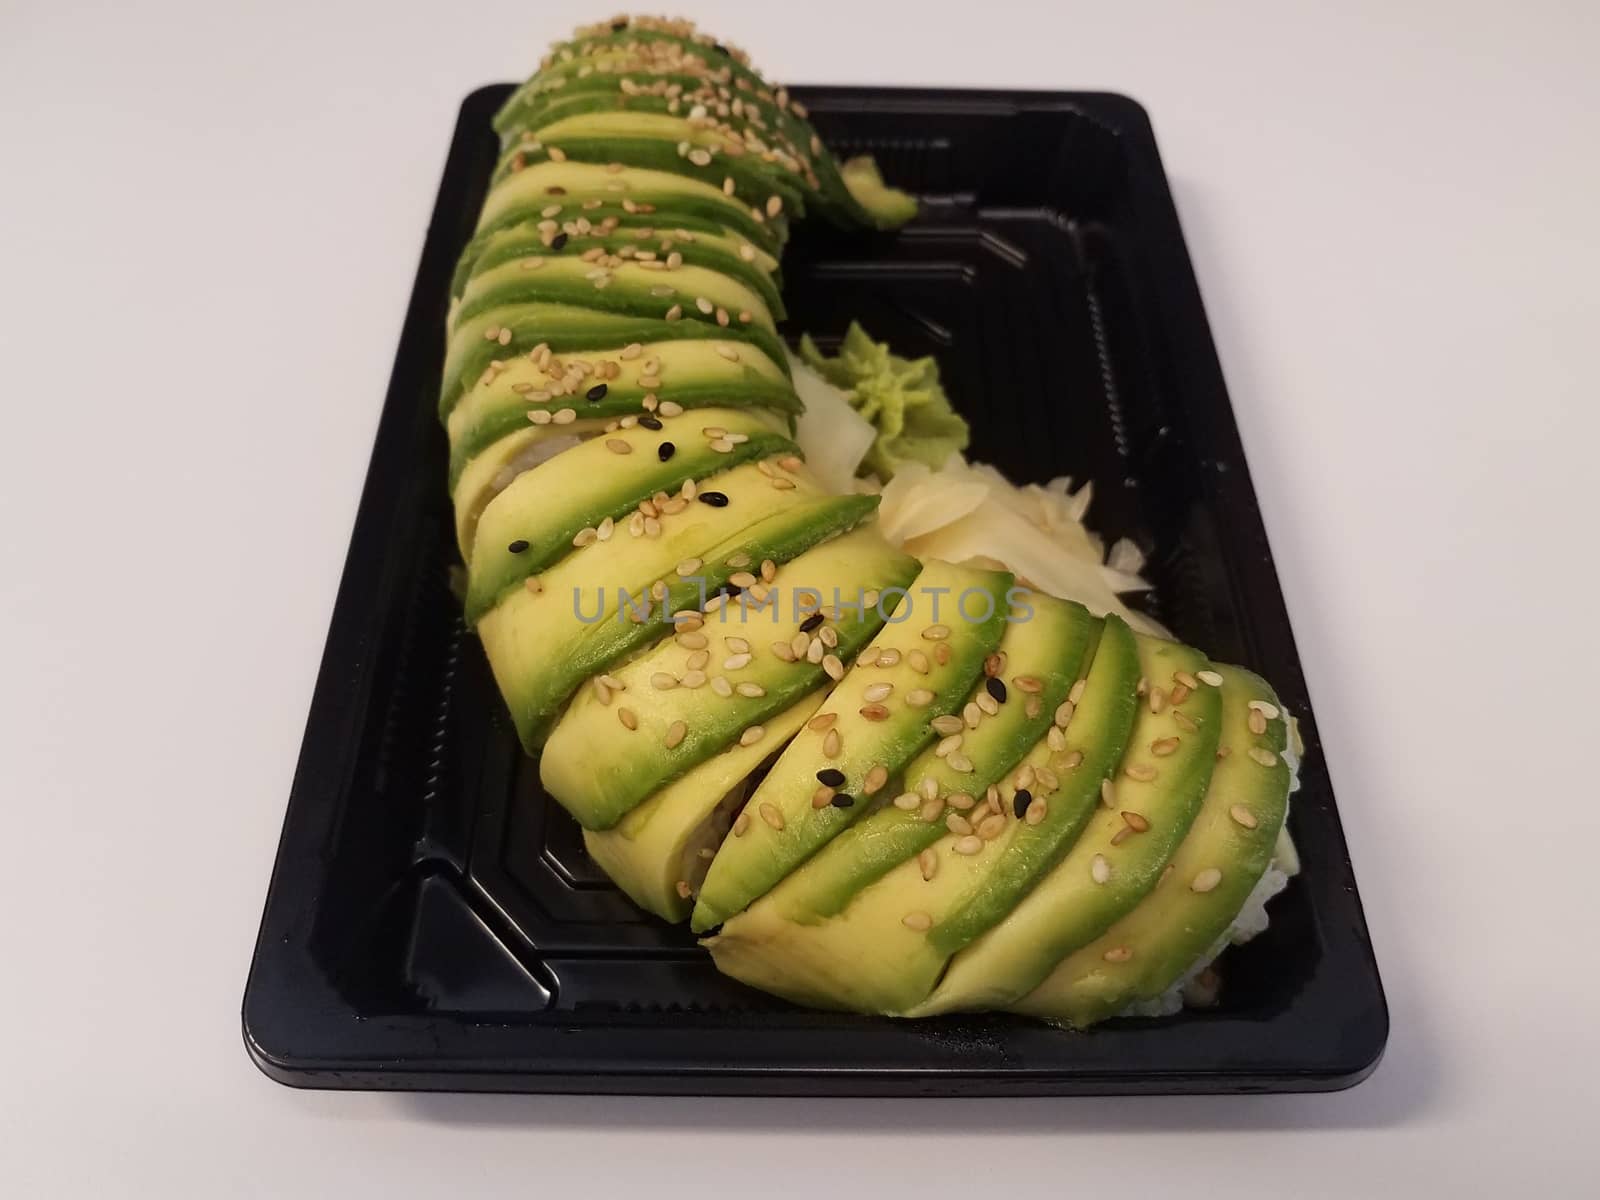 Japanese sushi with avocado and rice in black plastic container on white surface